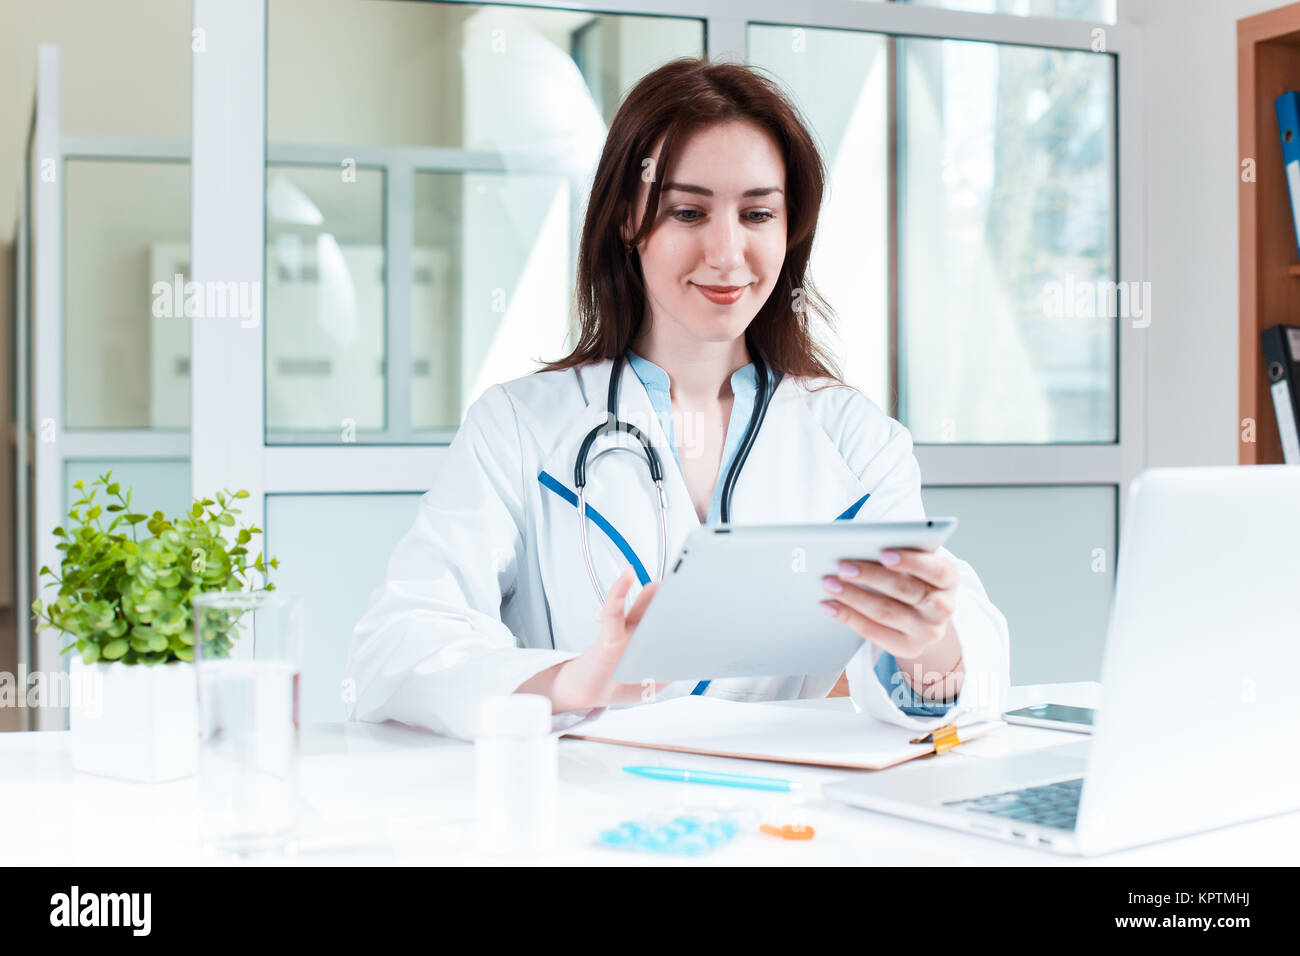 Woman doctor sitting at the table Stock Photo